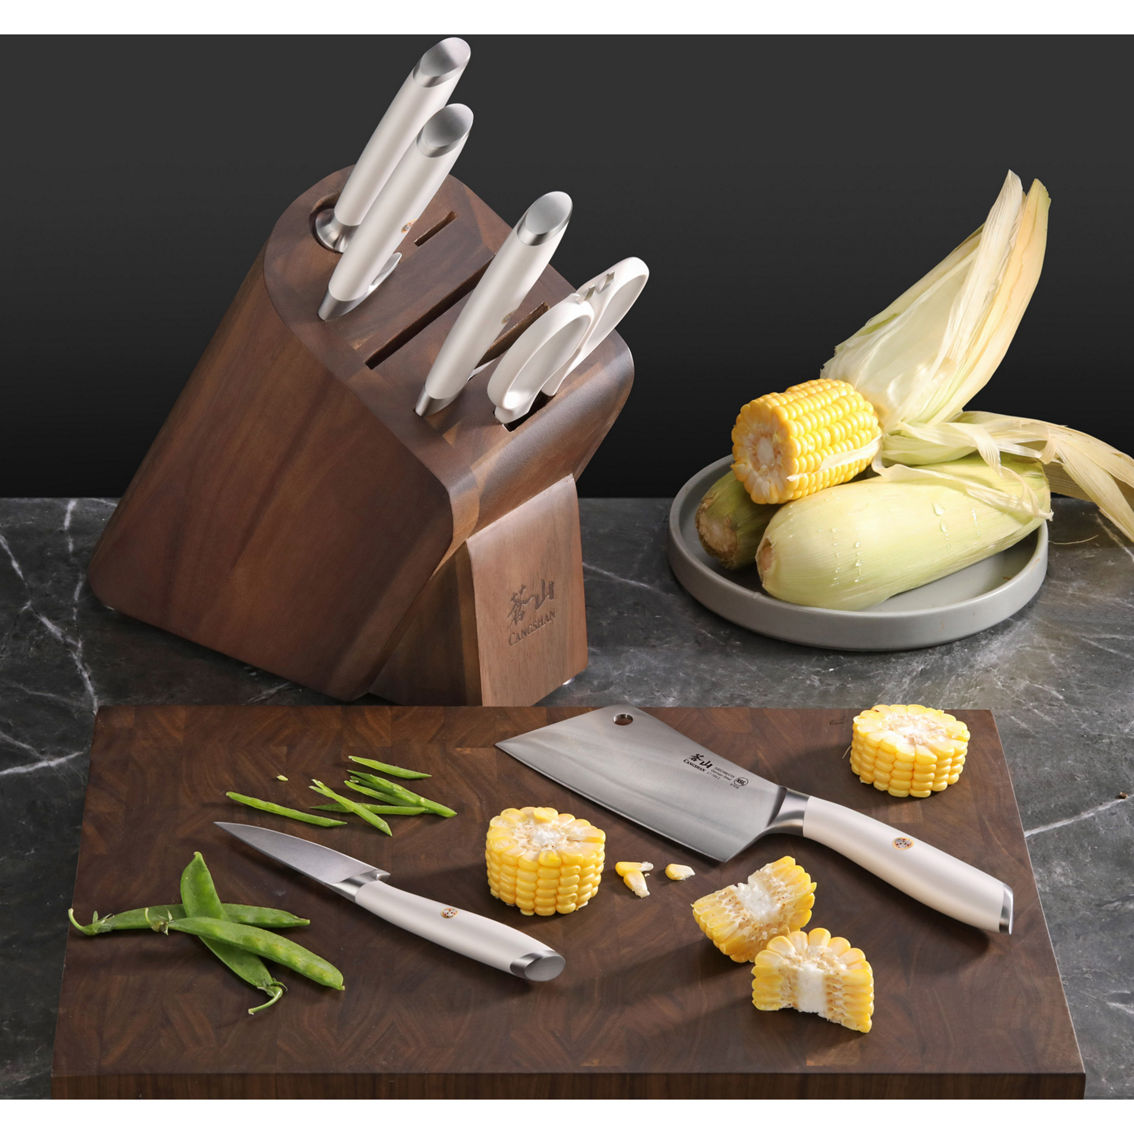 Cangshan Cutlery L1 Series White Cleaver Knife Block Set 7 pc. - Image 5 of 6